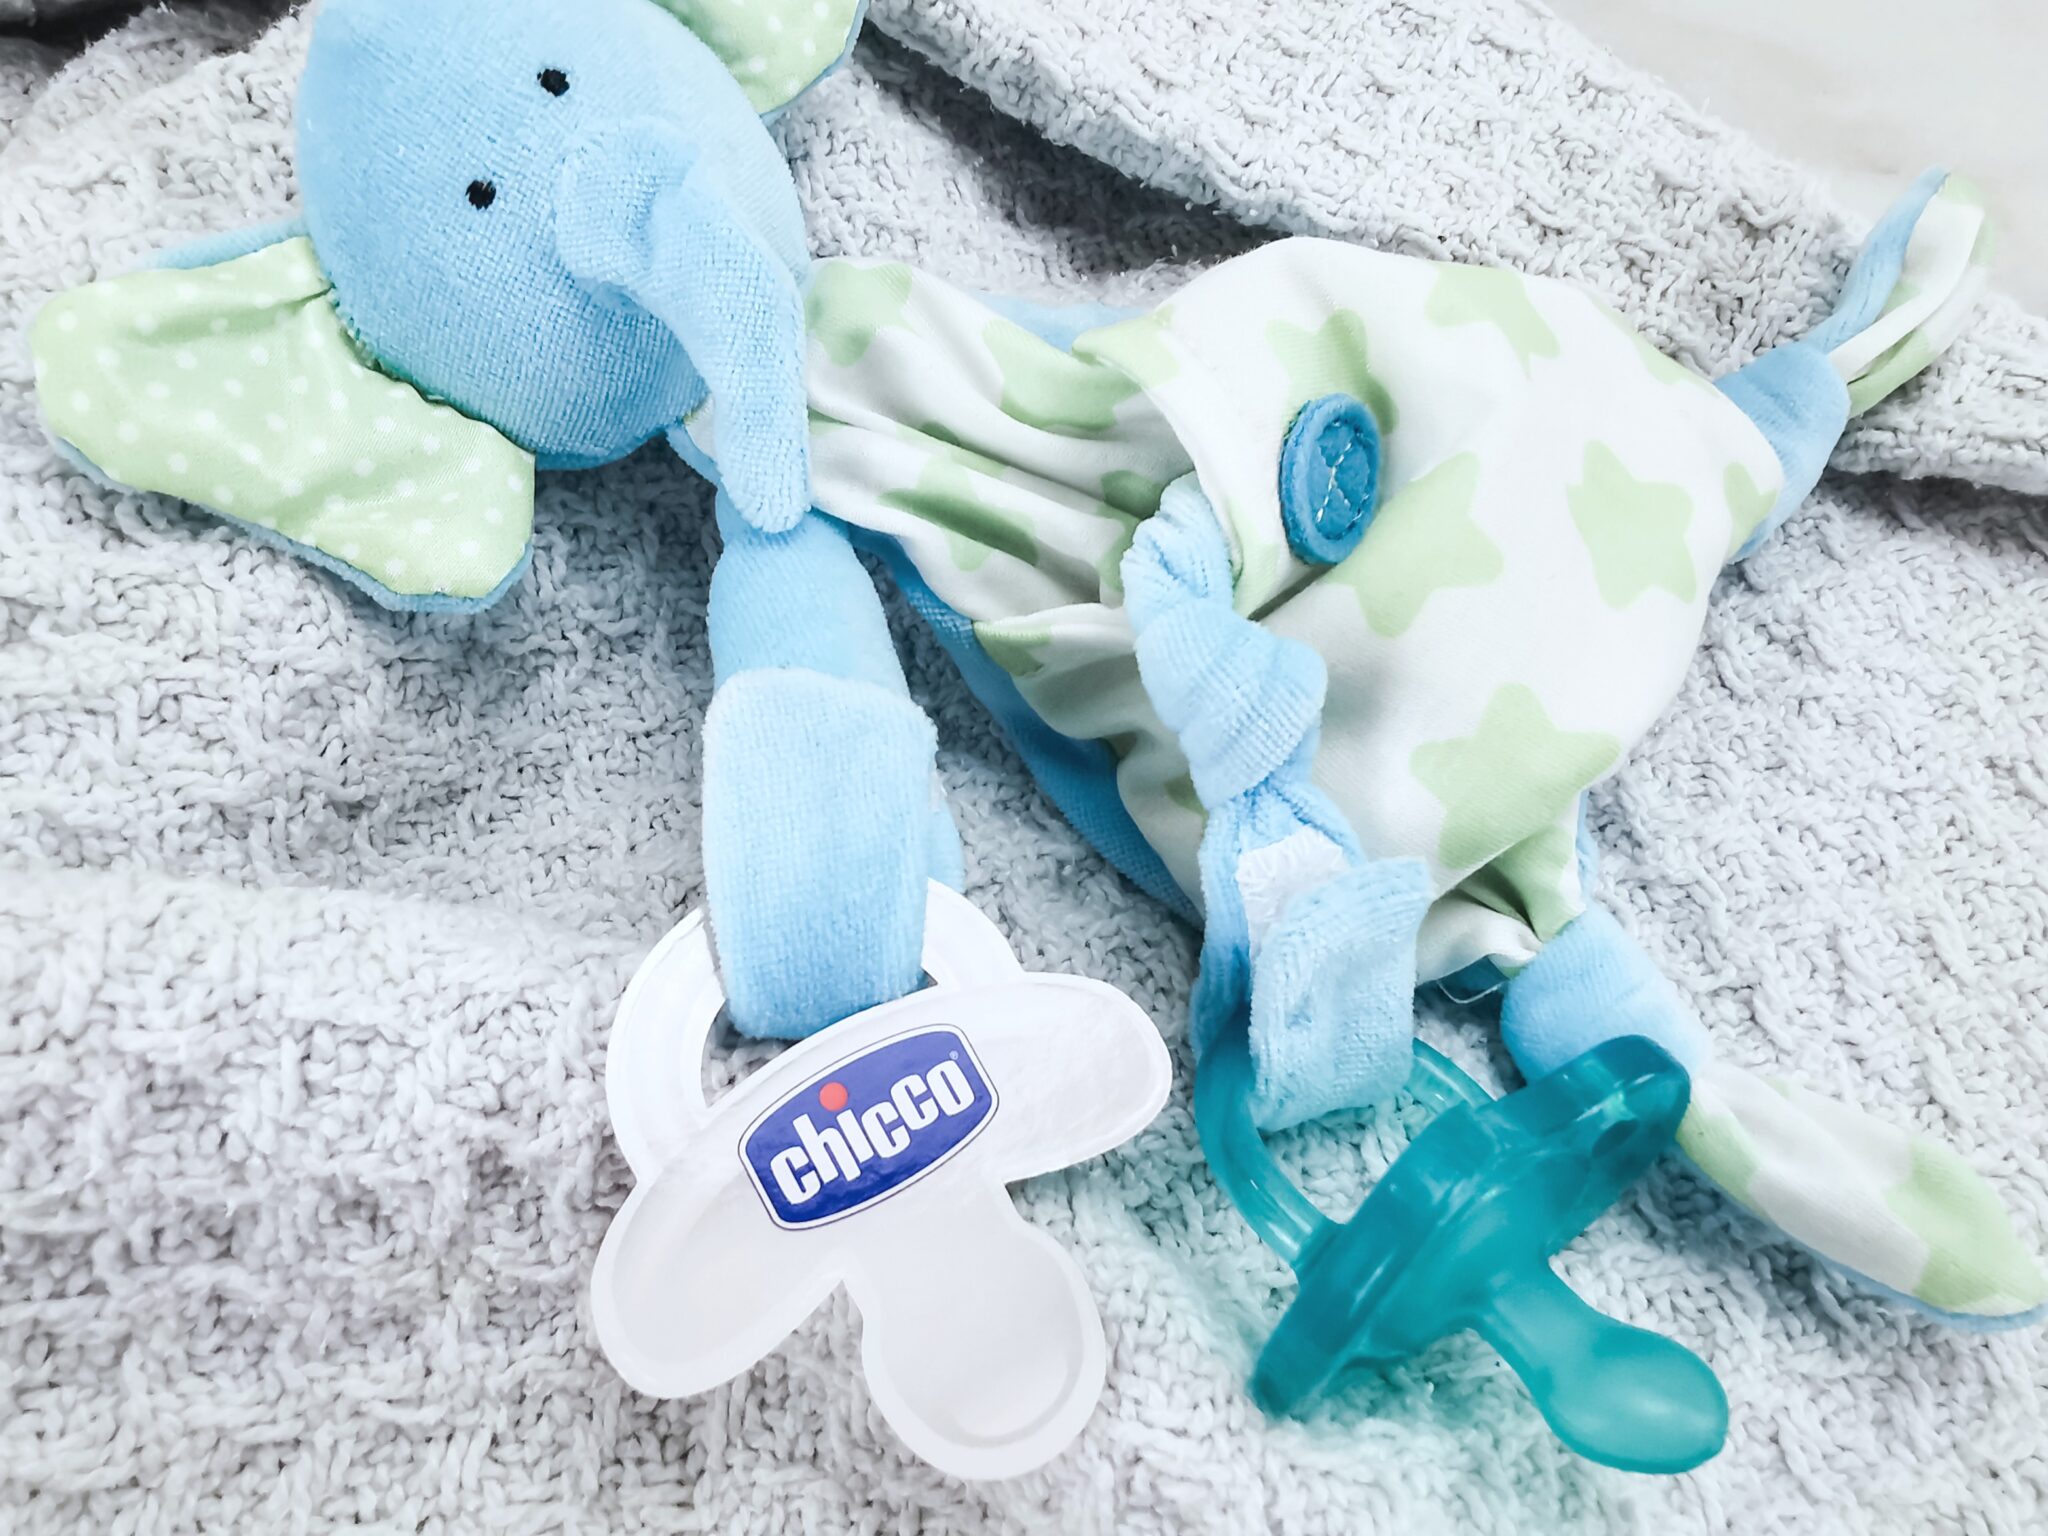 A blue blanket with a cute little teddy that holds the Chicco pacifier.